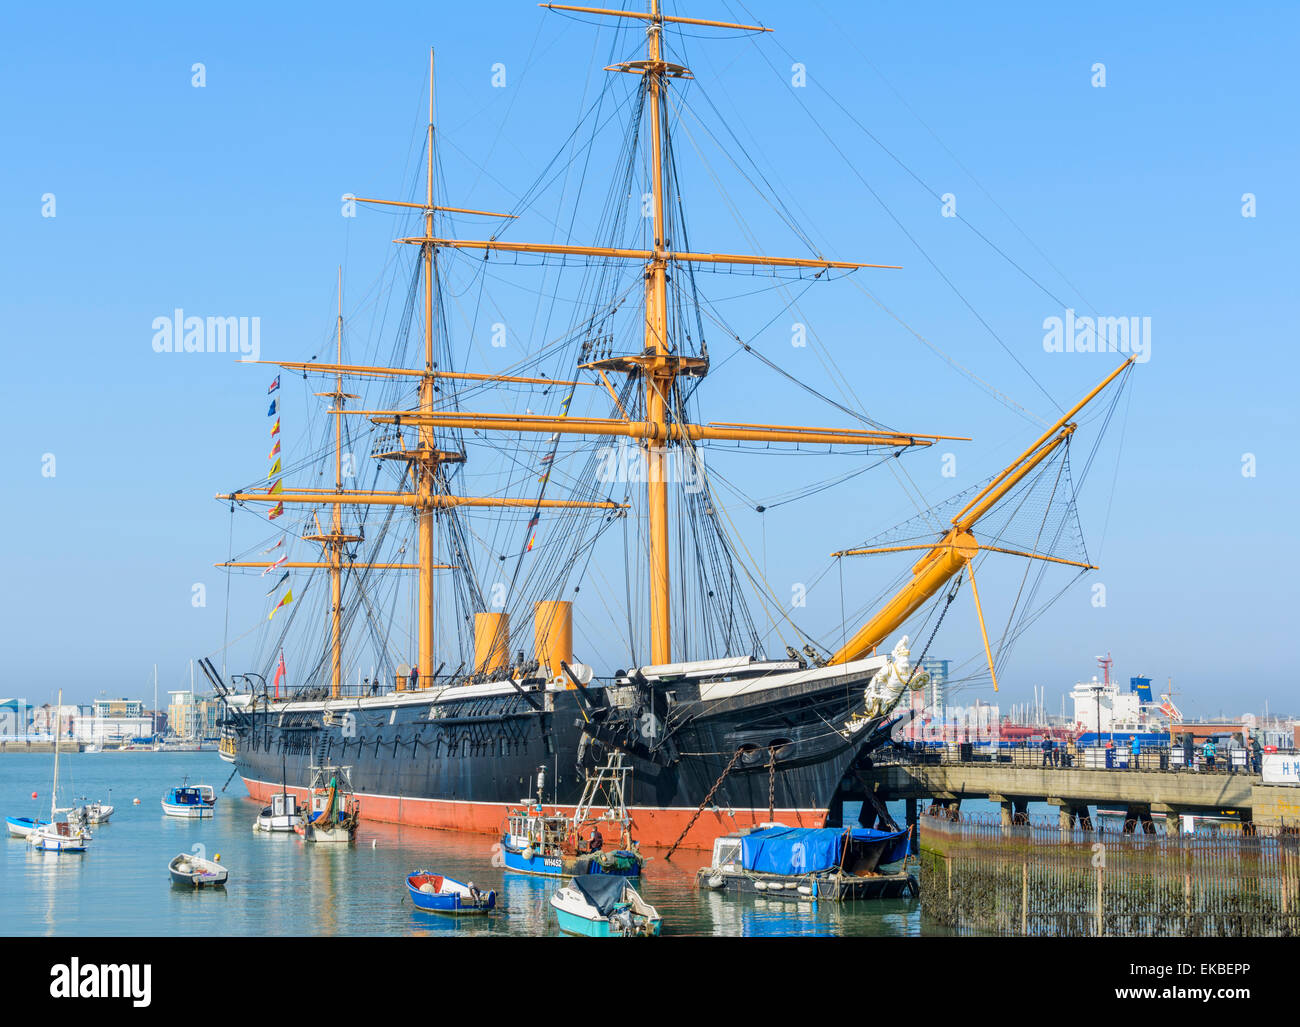 HMS Warrior ship in the docks in Portsmouth Harbour, Portsmouth, Hampshire, England, UK. Old wooden warship. Stock Photo